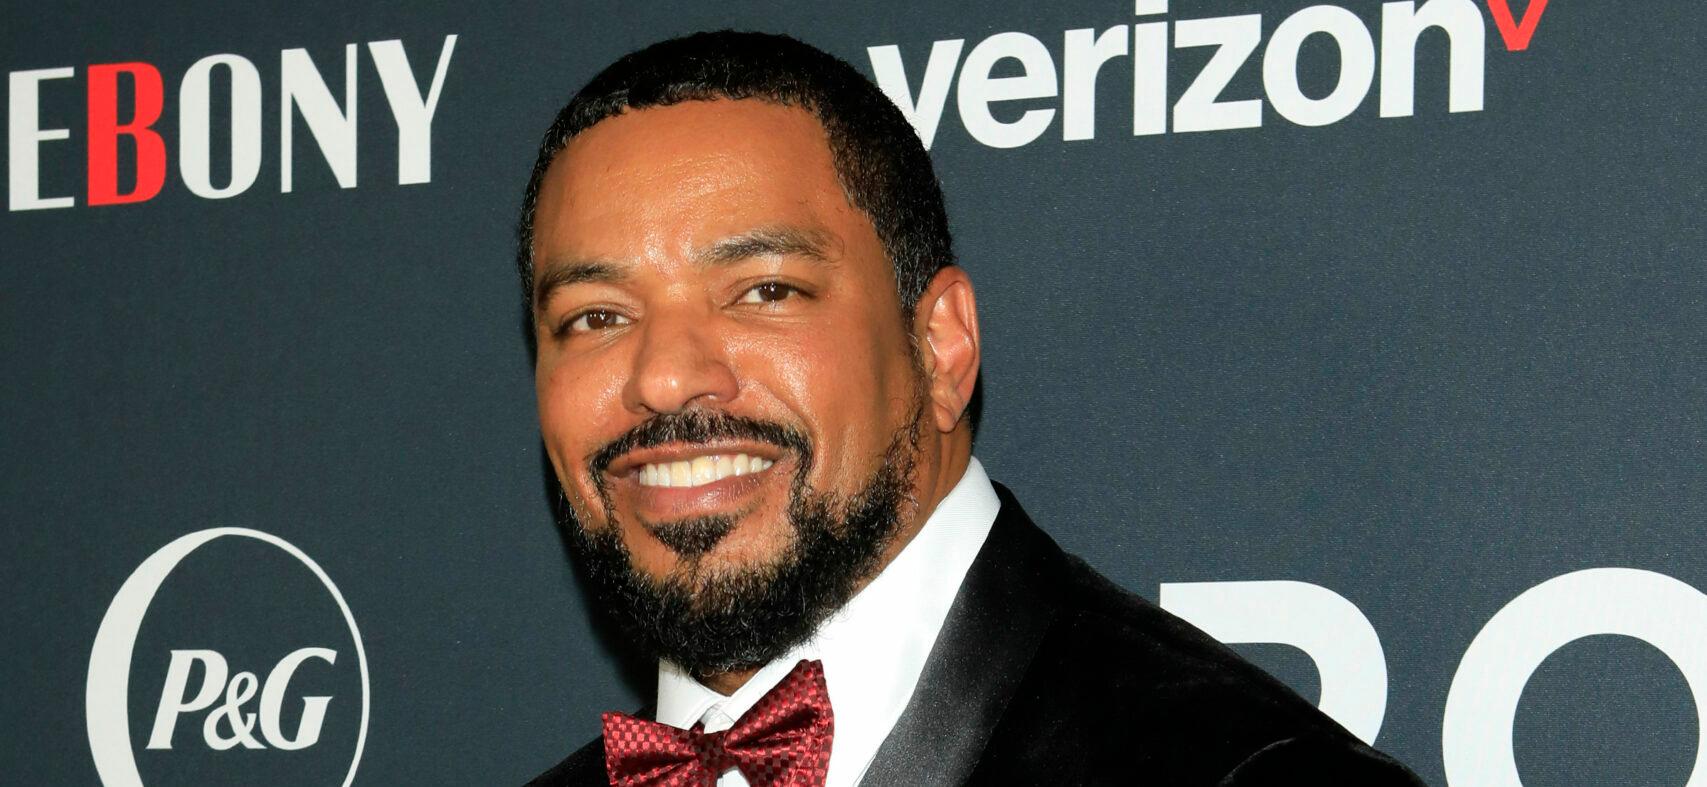 LOS ANGELES - OCT 23: Laz Alonso at 2021 Ebony Power 100 at the Beverly Hilton Hotel on October 23, 2021 in Beverly Hills, CA